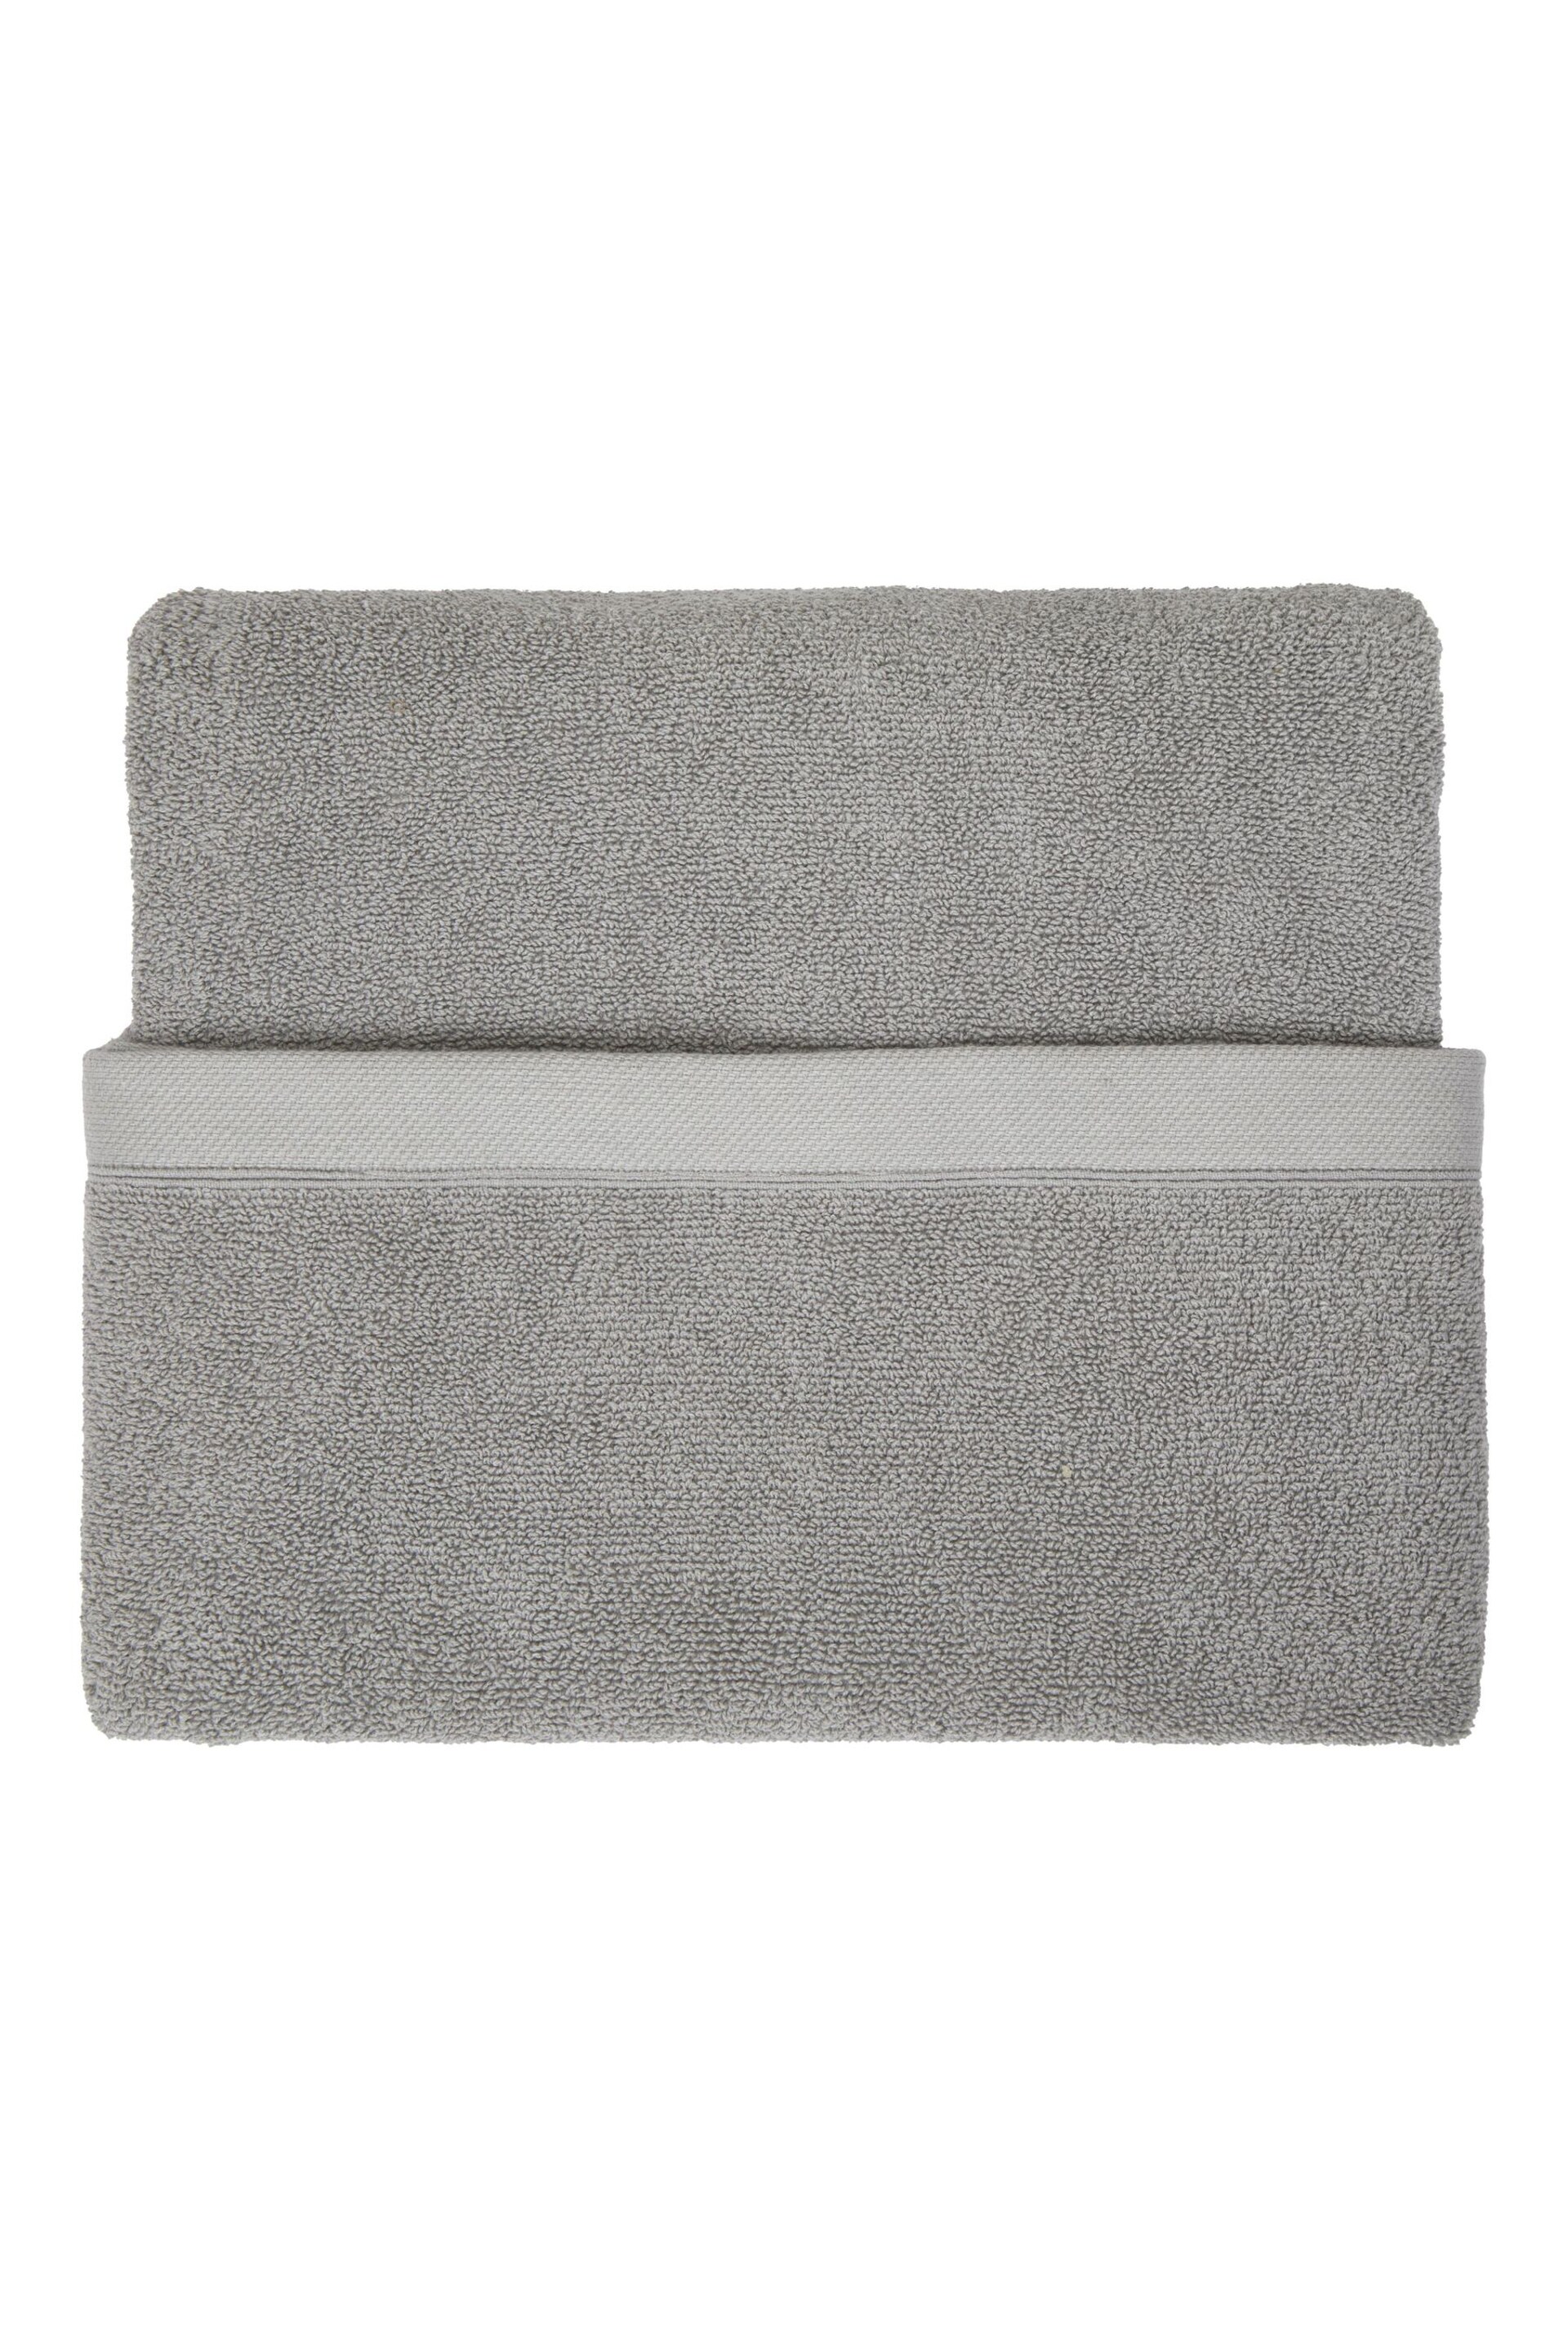 Drift Home Grey Abode Eco Towel - Image 1 of 6